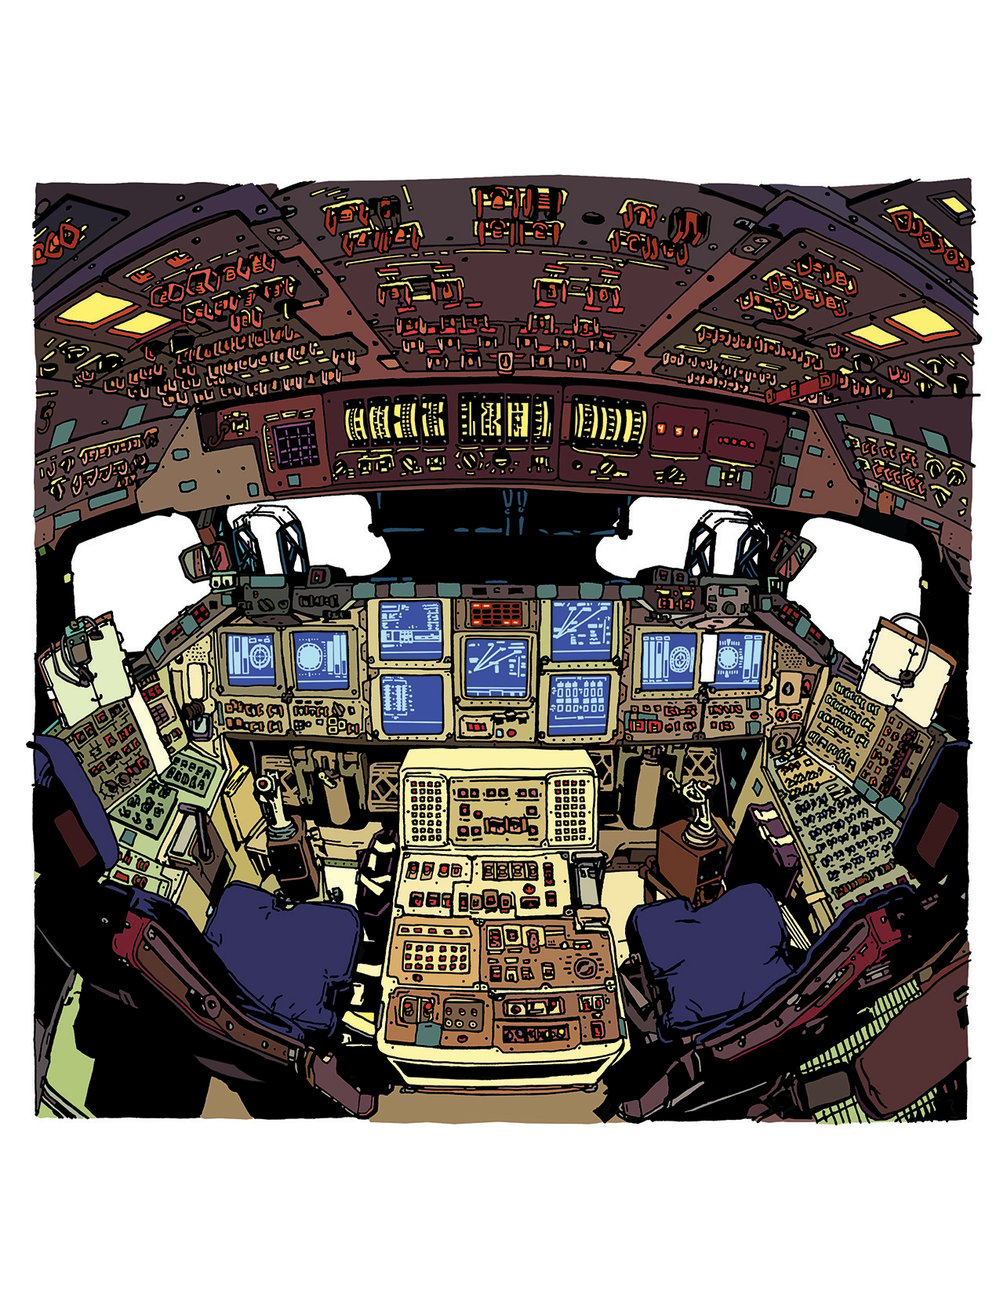 Image of Space Shuttle cockpit print